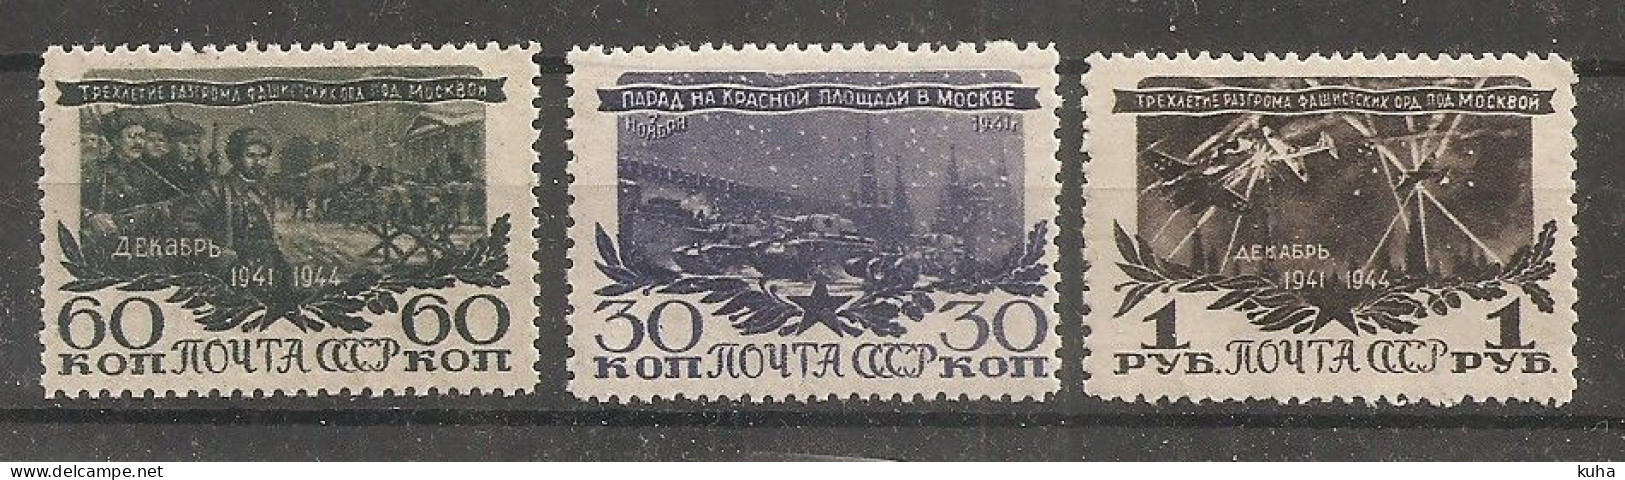 Russia Russie USSR Soviet Union 1945 WWII   MNH - Unused Stamps